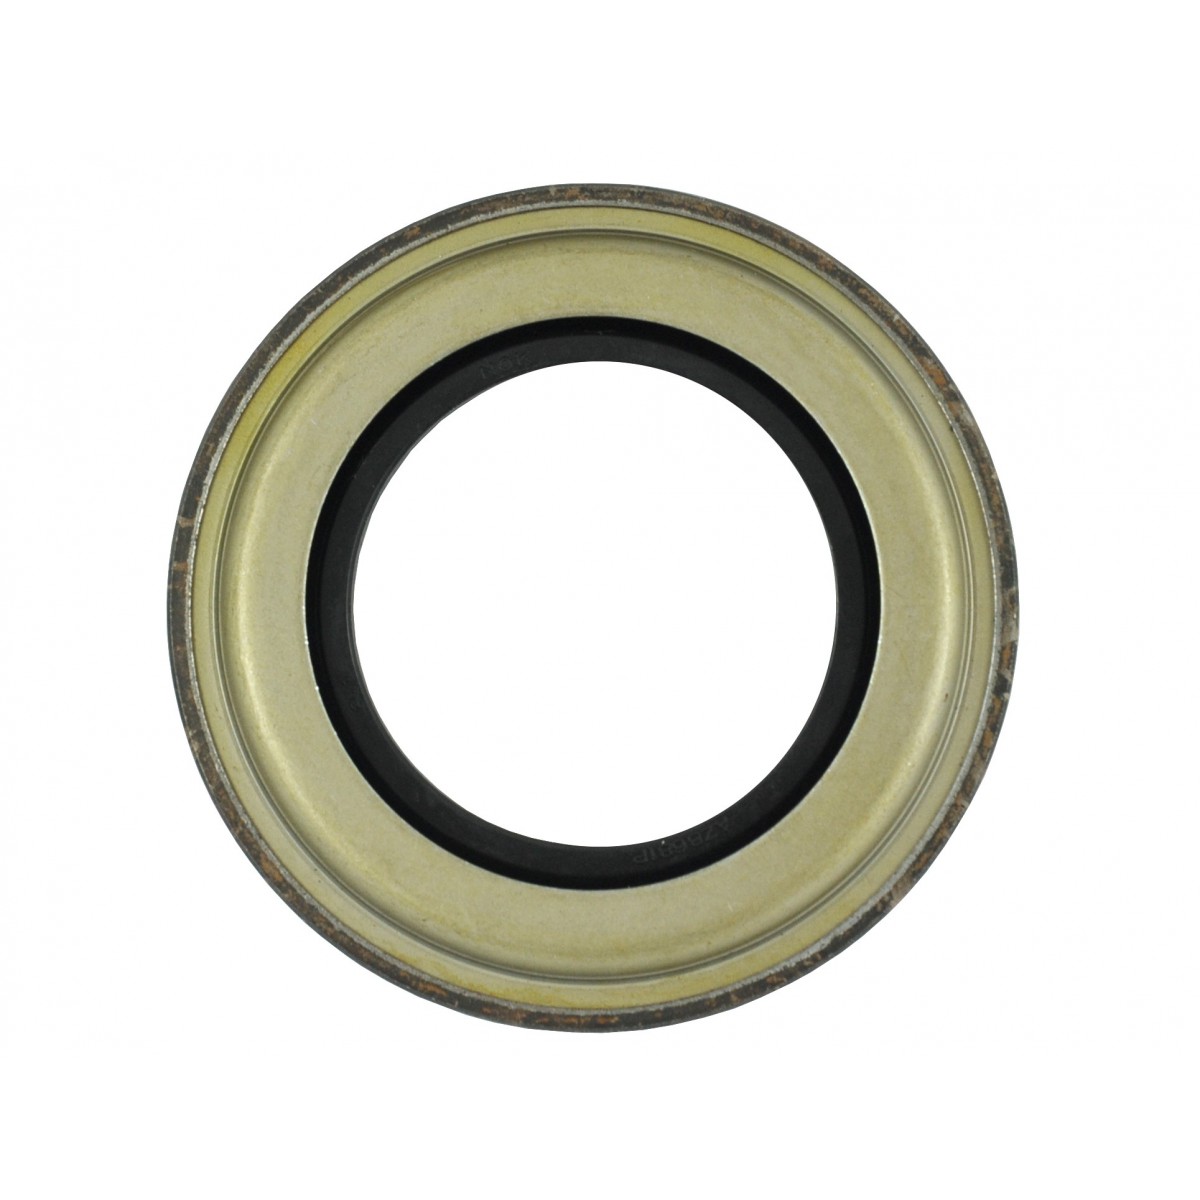 Oil Seal 55x90x11.50 mm for a Kubota tiller with a center drive